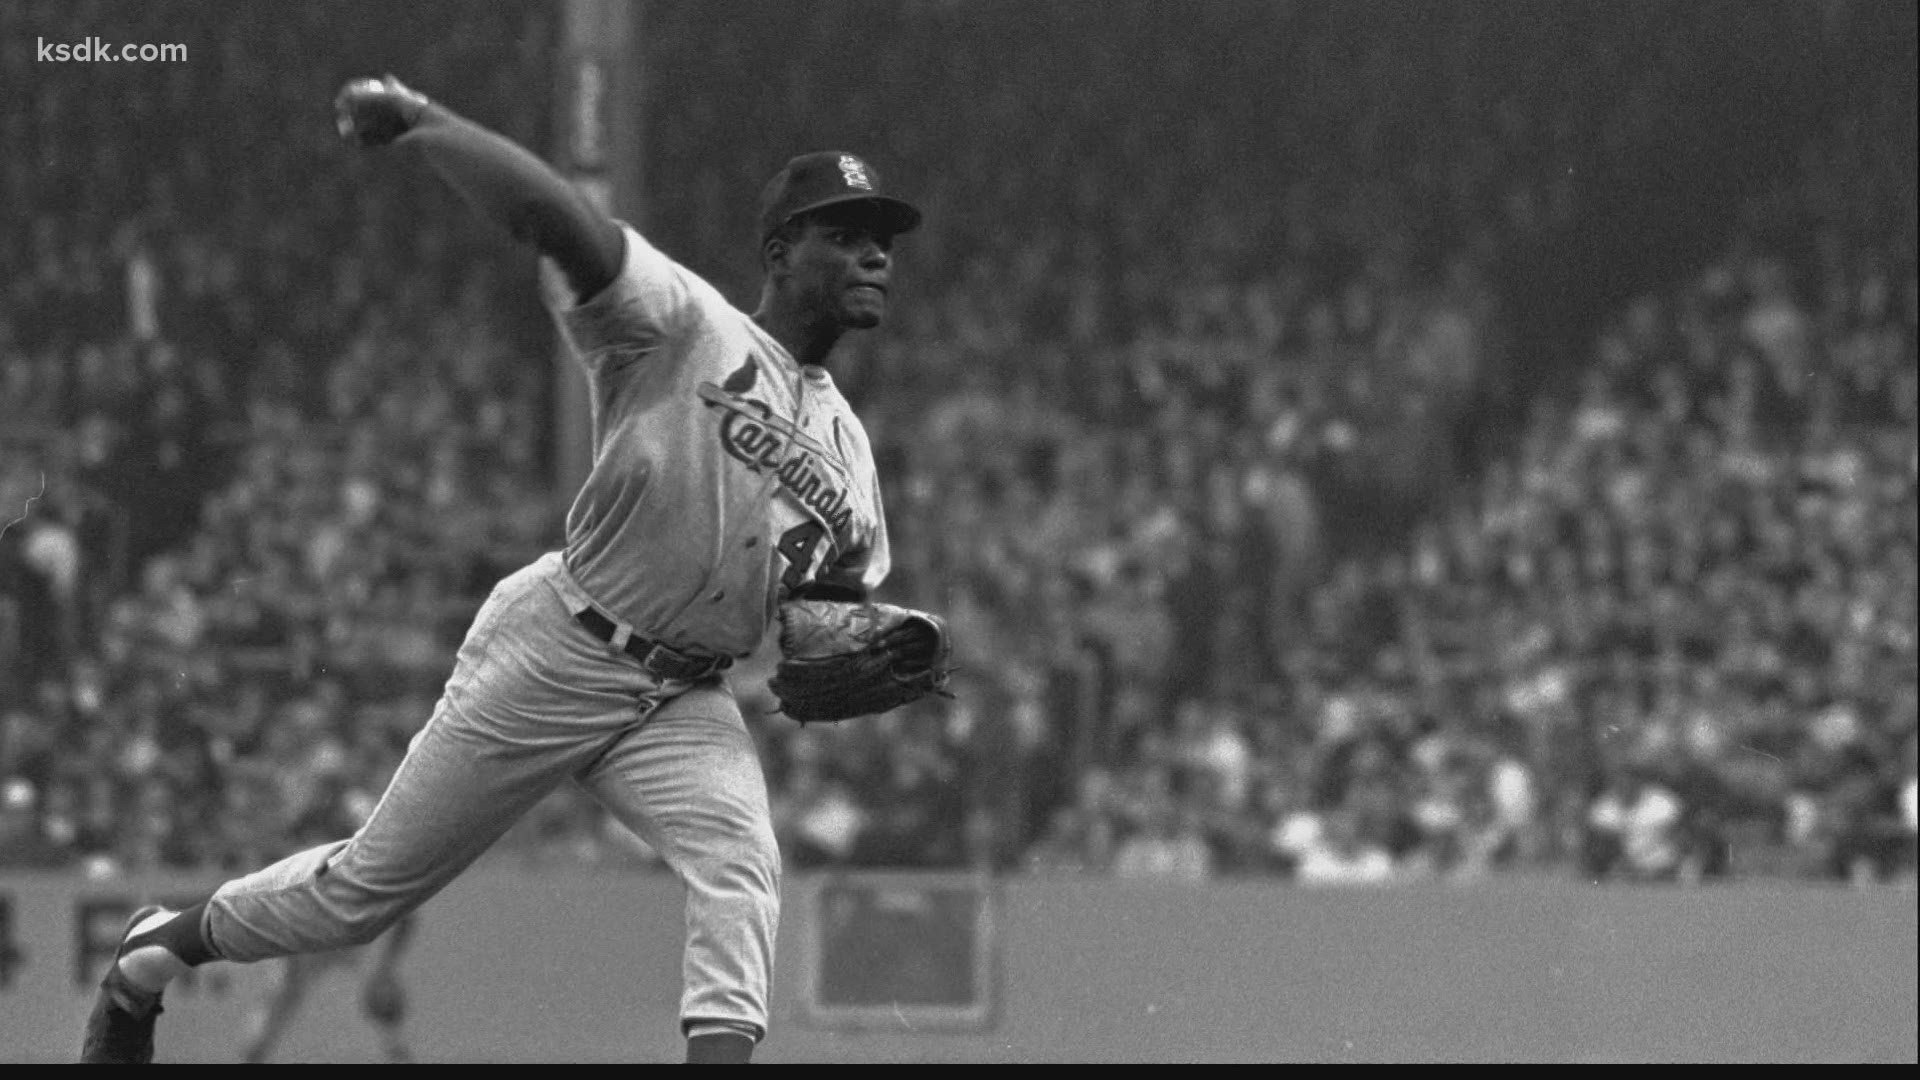 The legendary Cardinals pitcher died at age 84 after a bout cancer